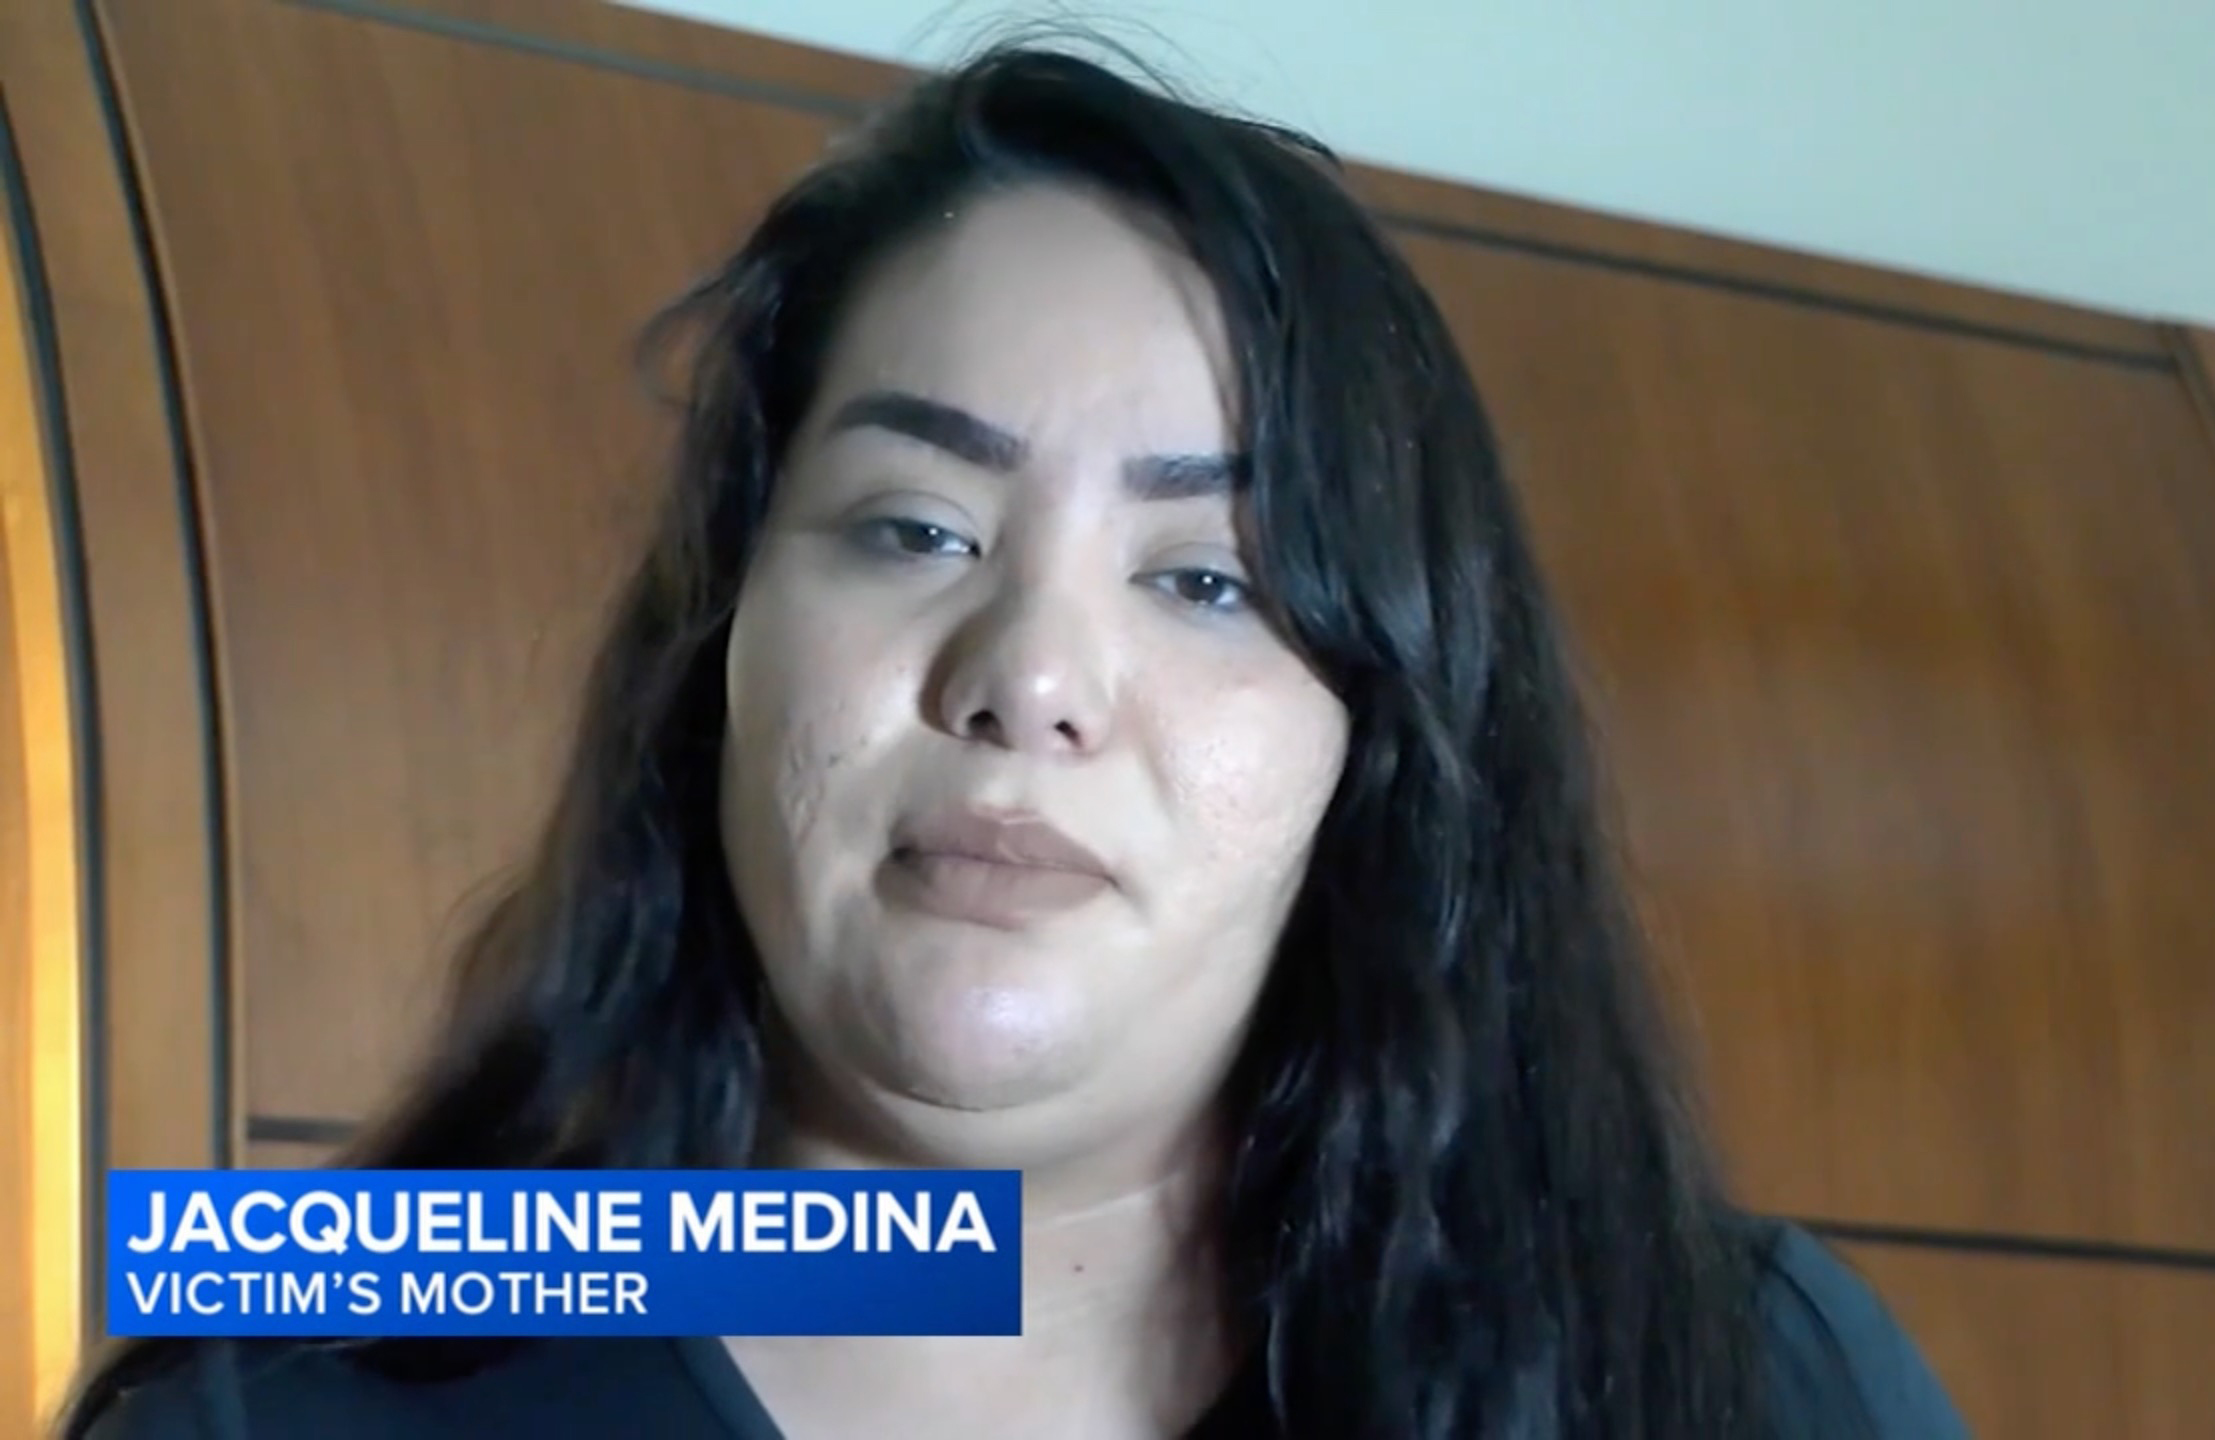 Mother Jaqueline Medina makes gruesome discovery after 16-year-old daughter allegedly murdered in their apartment EDNA, Texas (KTRK) -- The mother of a 16-year-old high school cheerleader said she was the one who made the horrendous discovery of her daughter's murdered body in their Edna apartment Tuesday evening.  Jacqueline Medina claimed she knew something was wrong when her daughter, Lizbeth, never showed up to the Edna Cheer Parade with her squad. That's when Medina said she rushed home. https://abc13.com/edna-high-school-cheerleader-killed-student-death-investigation-teen-found-dead-in-home/14151732/